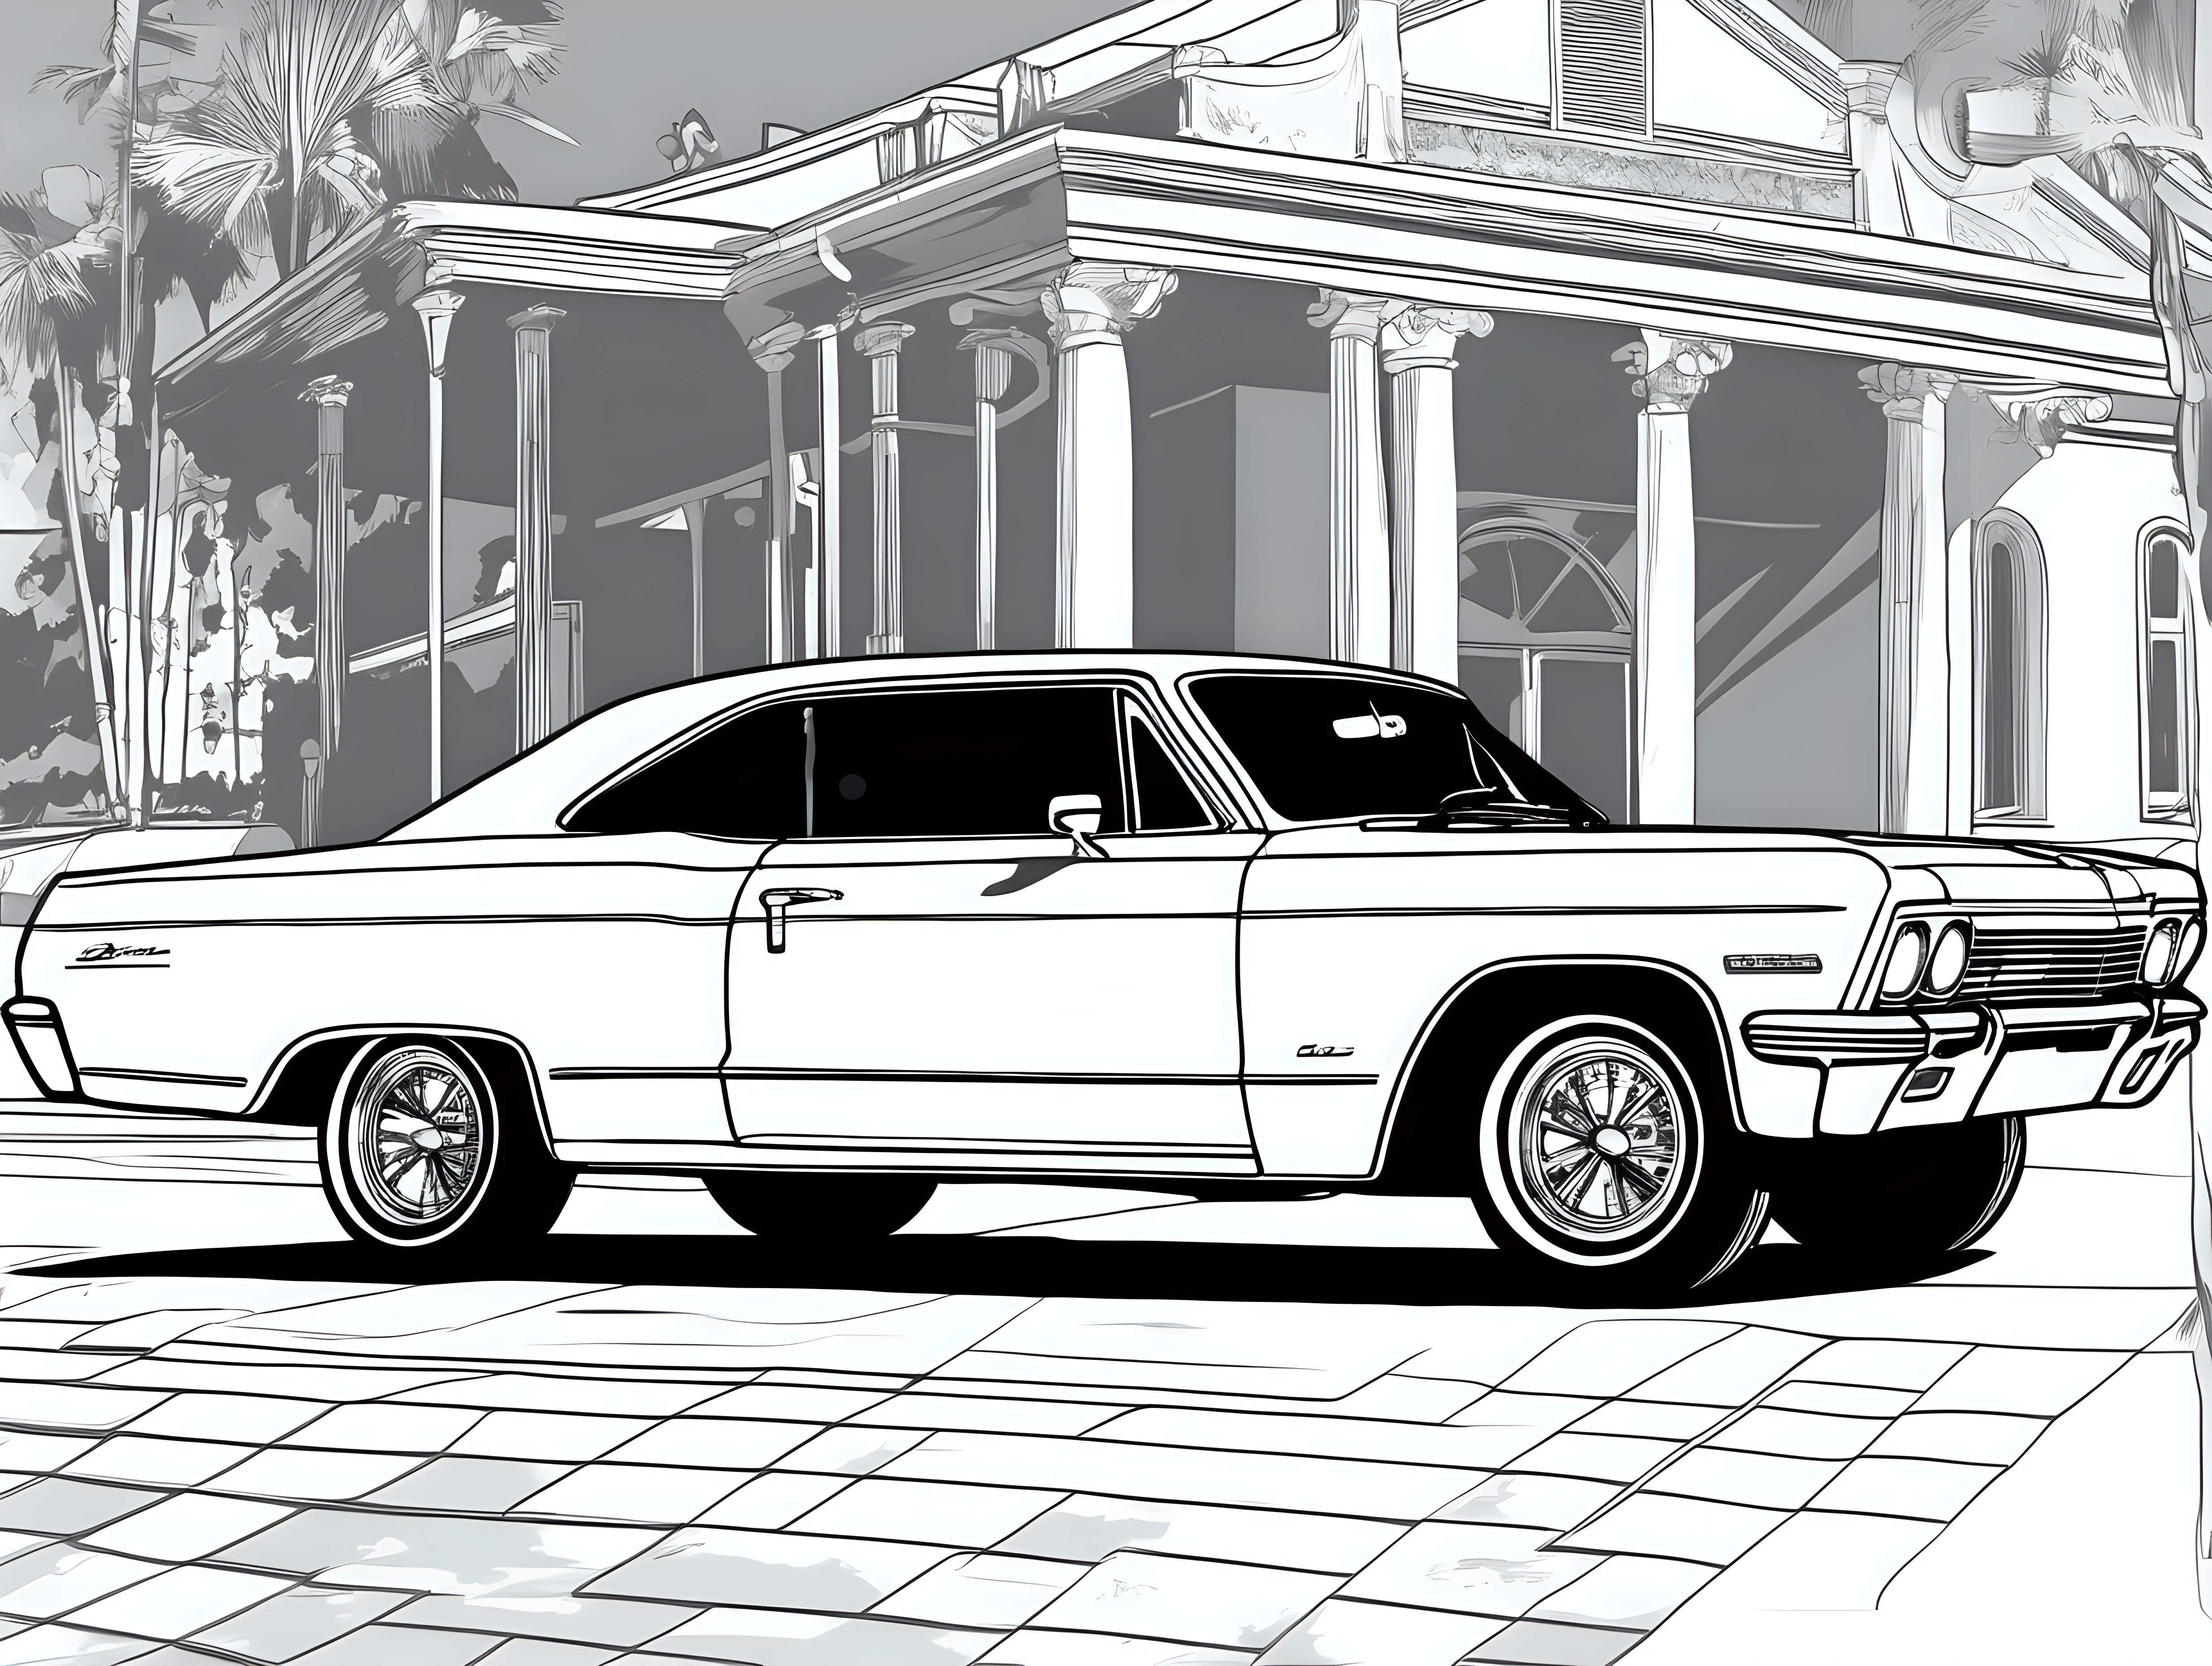  classic American automobile, 1966 Chevy Impala, clean line art, no shade